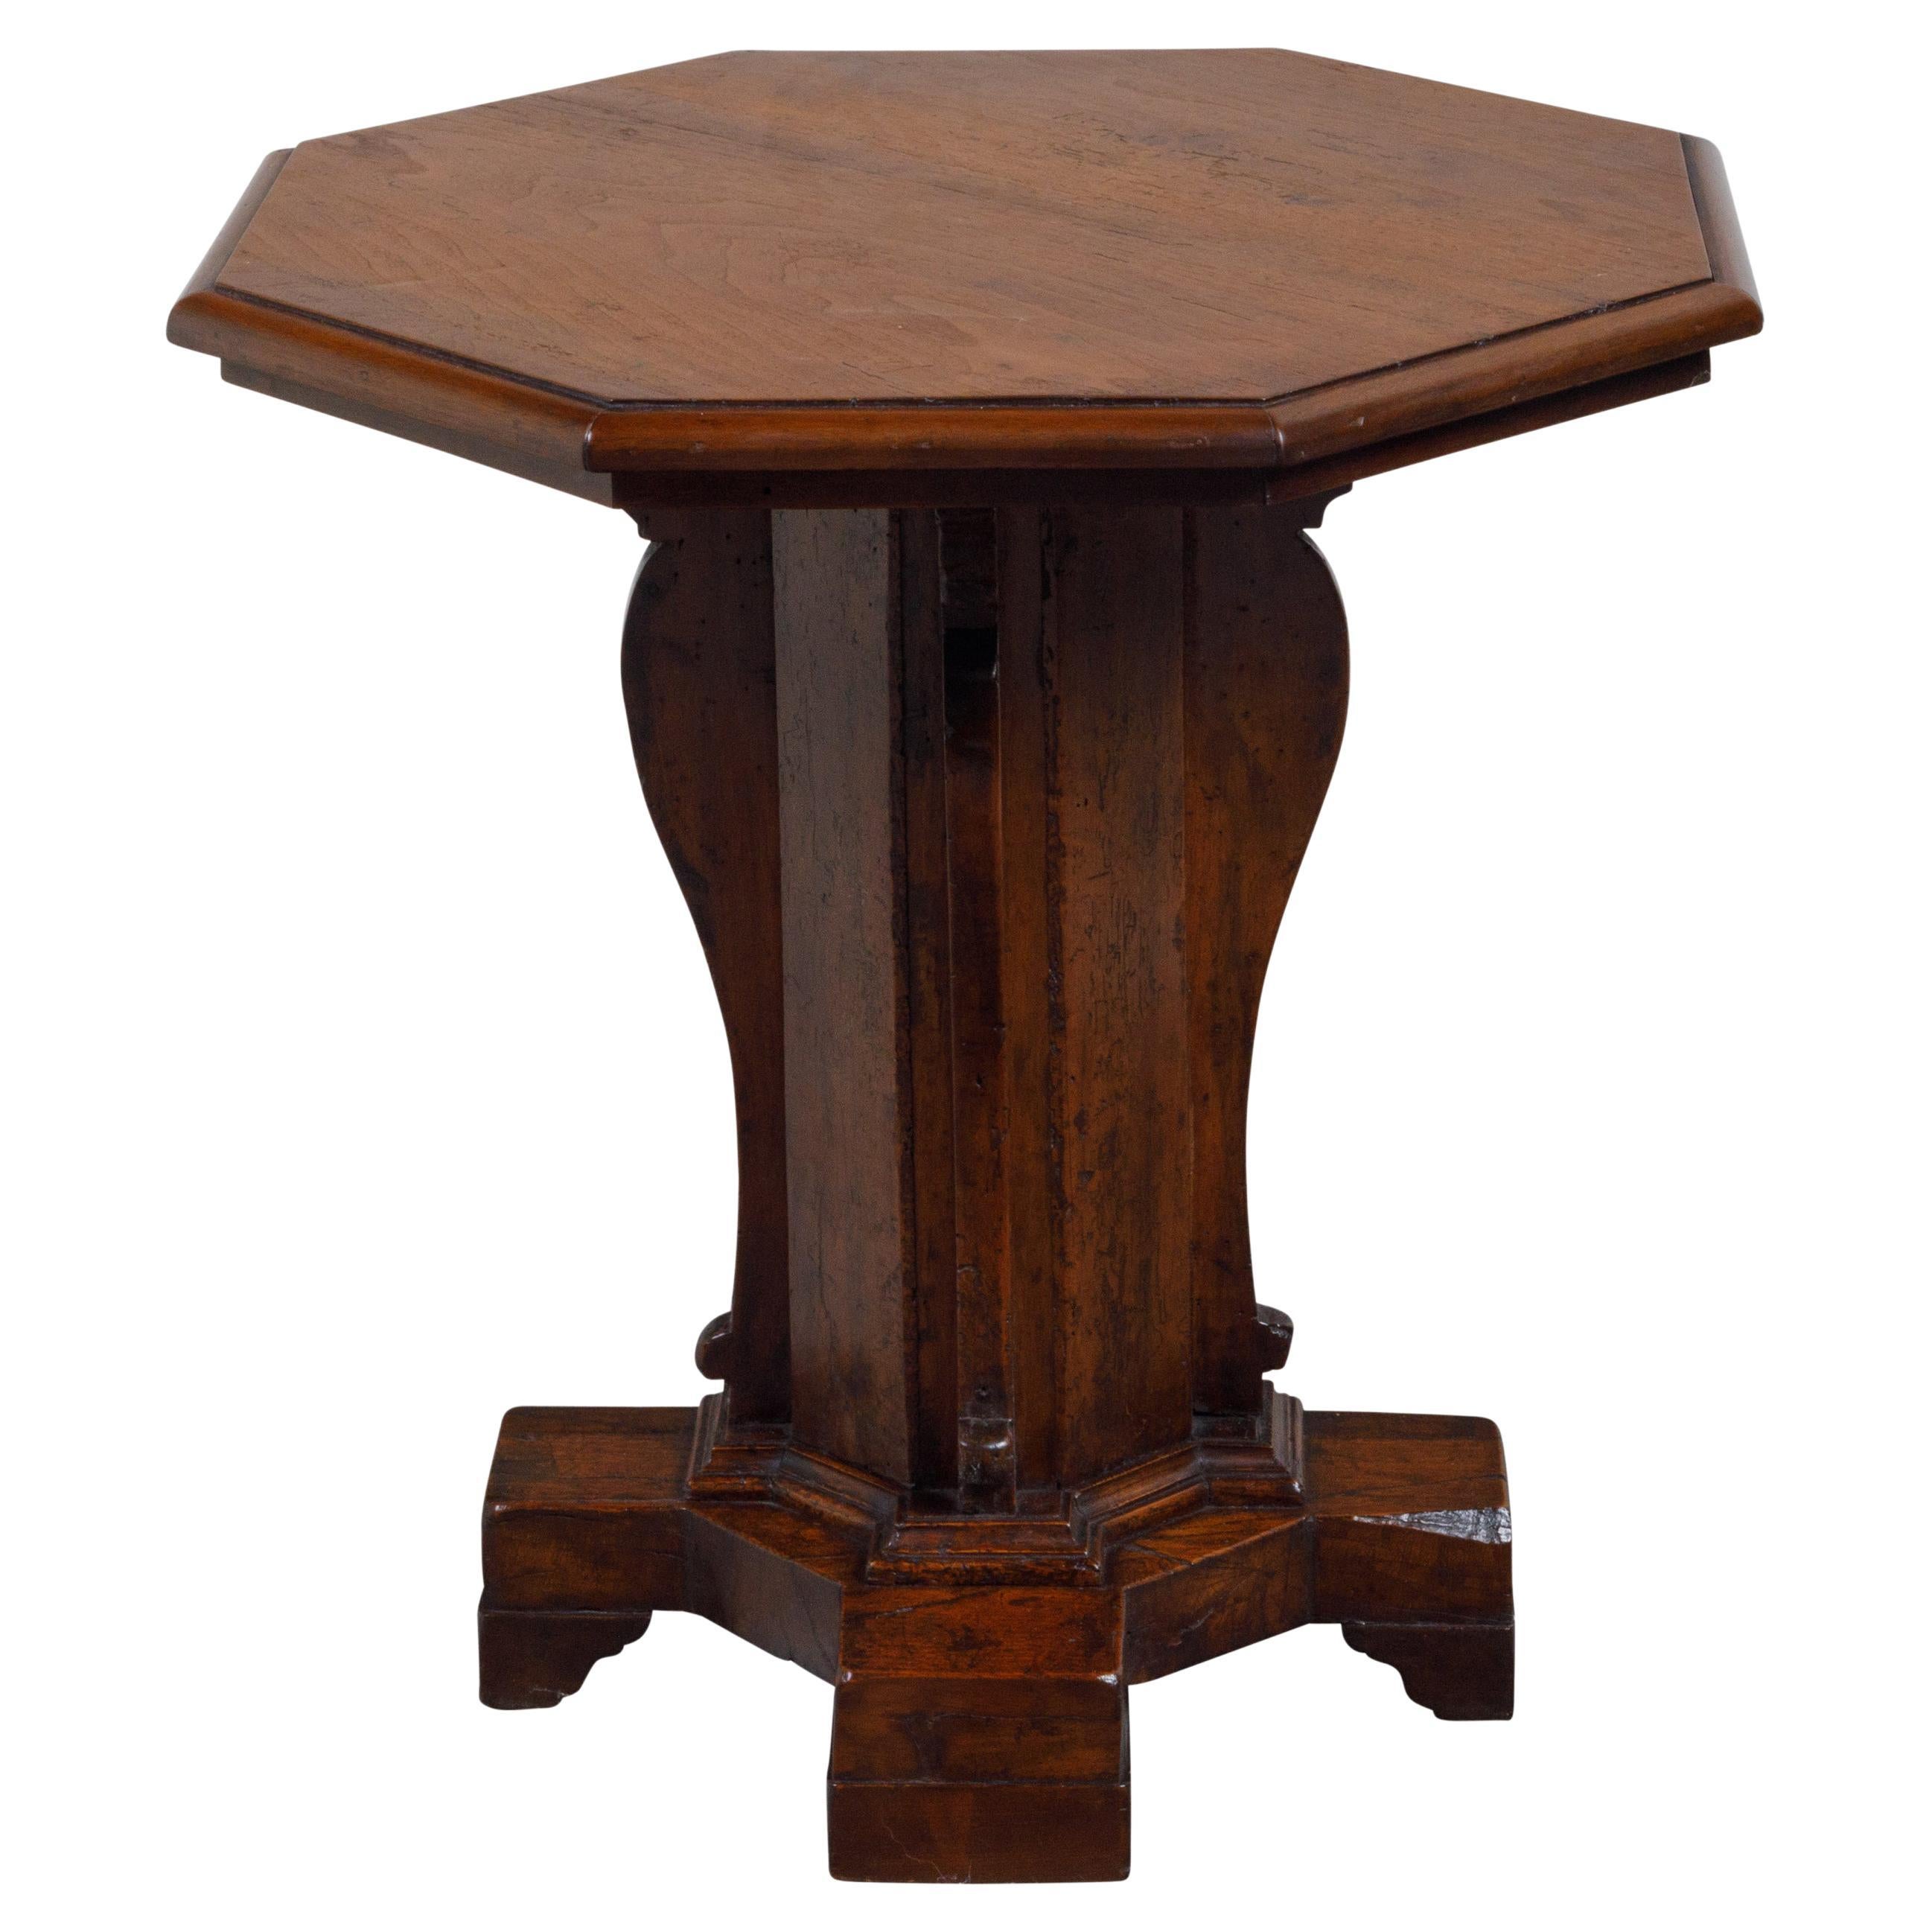 Italian 19th Century Walnut Side Table with Octagonal Top and Pedestal Base